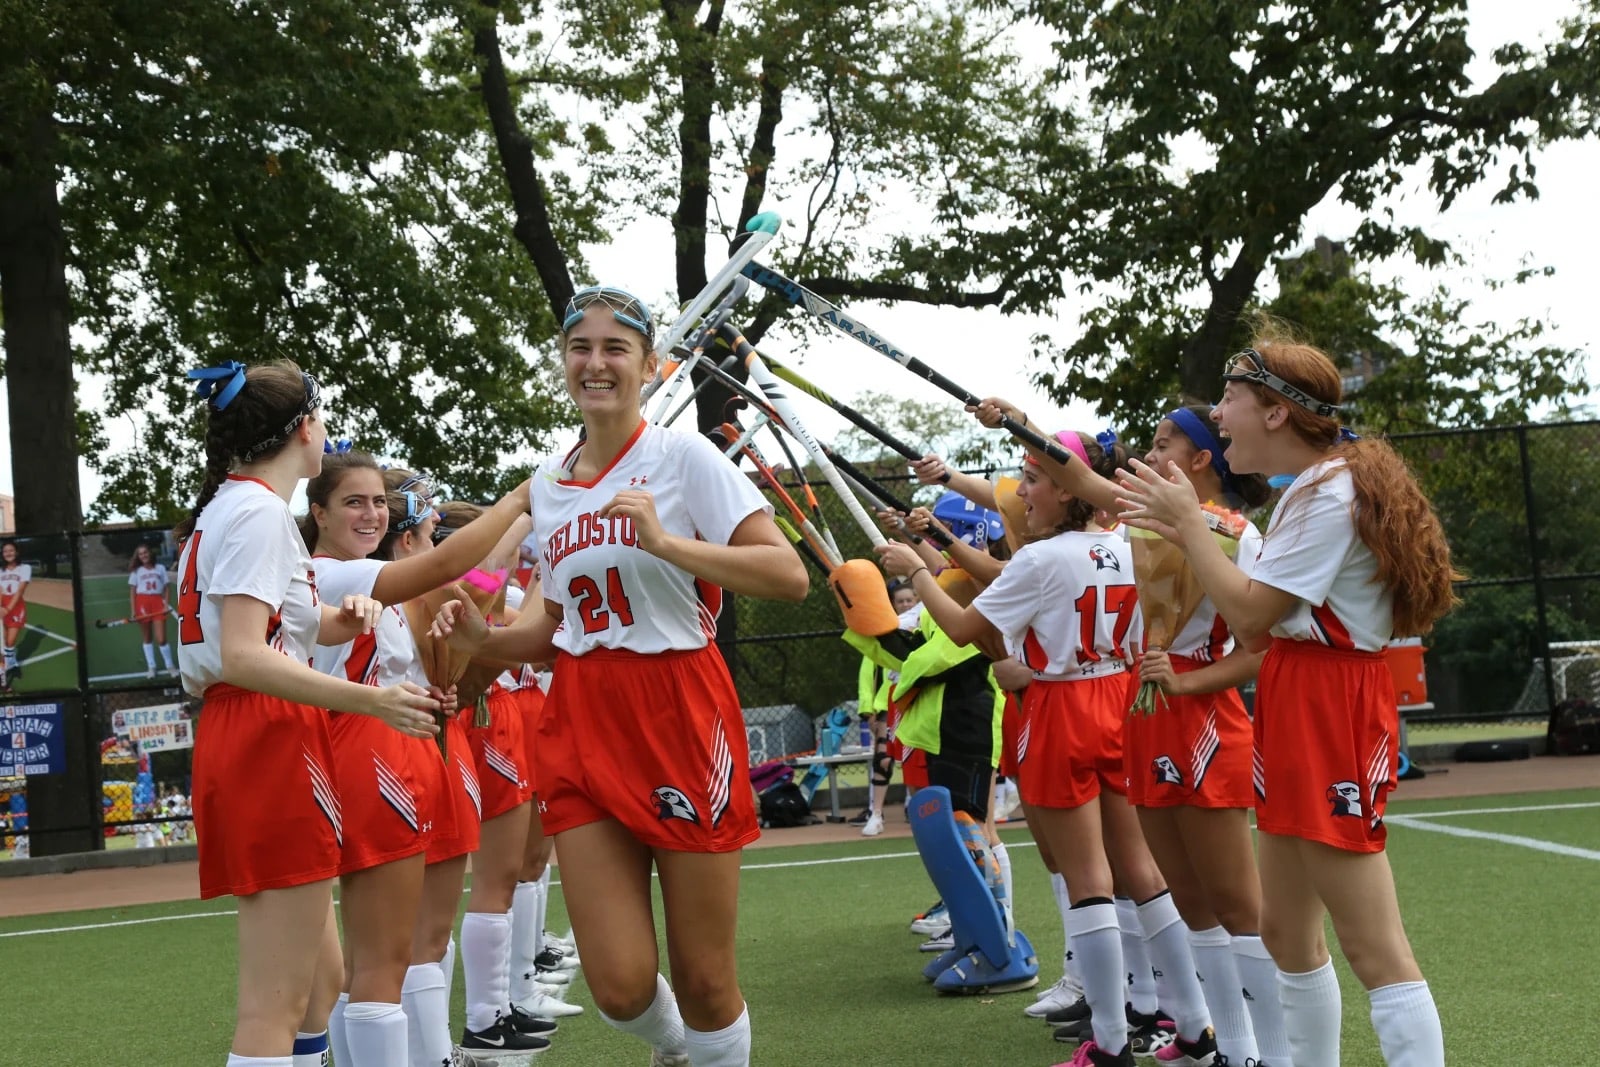 Varsity field hockey smiles as she runs through player tunnel before game